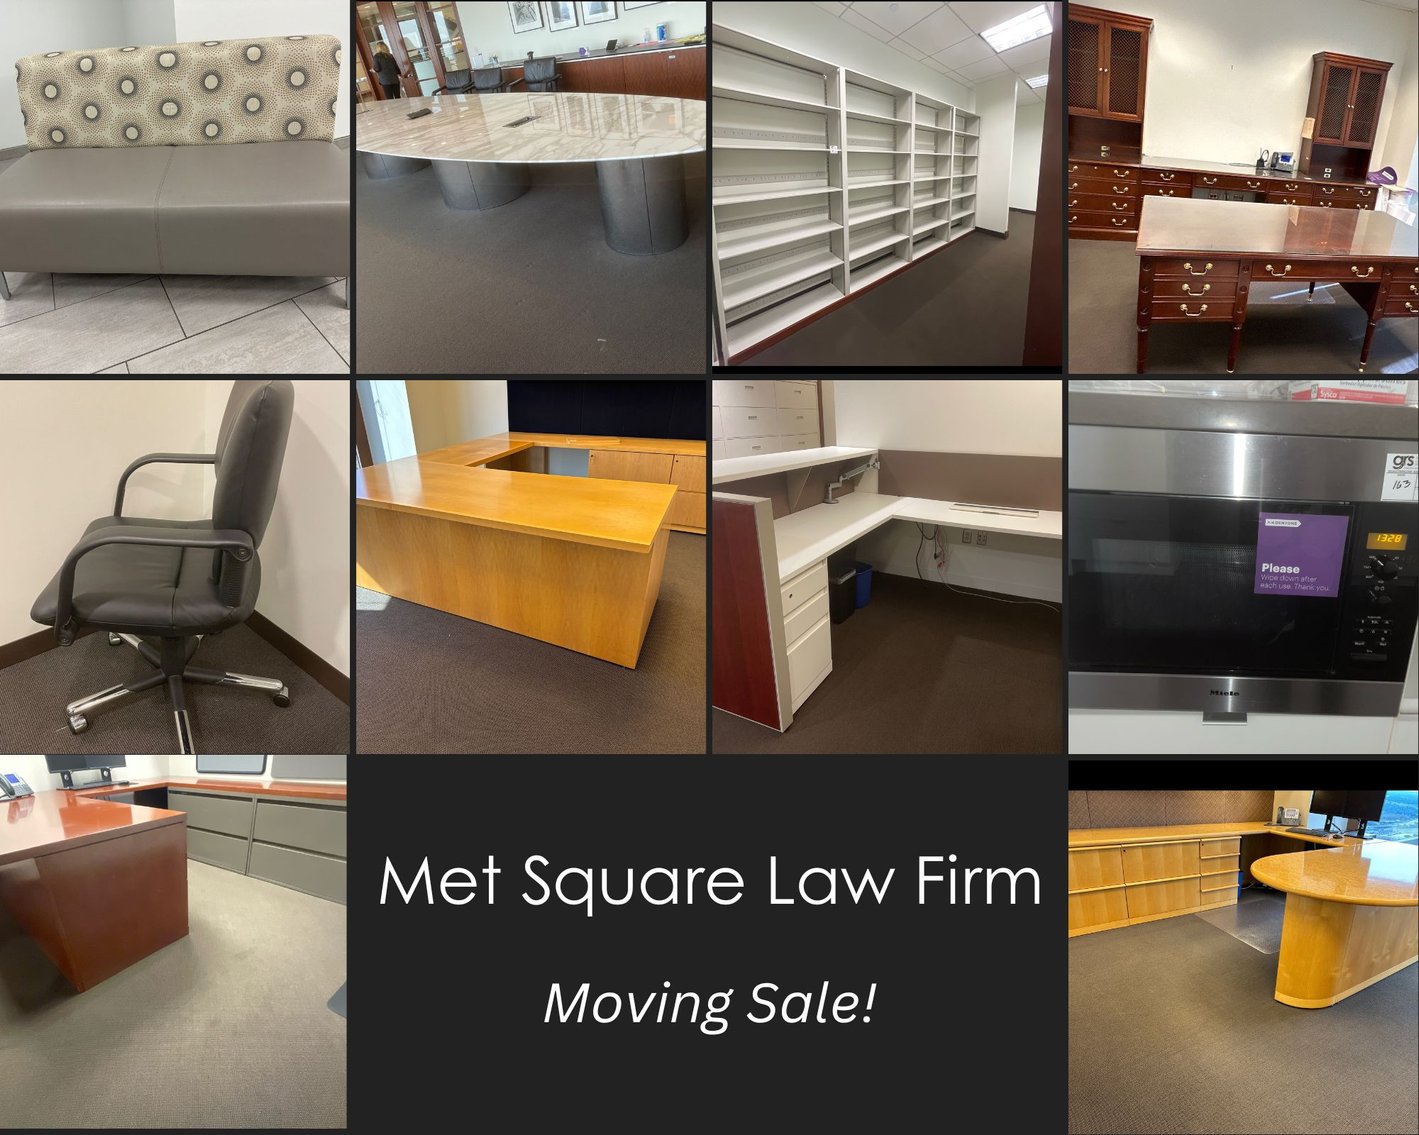 Met Square Law Firm Moving Sale